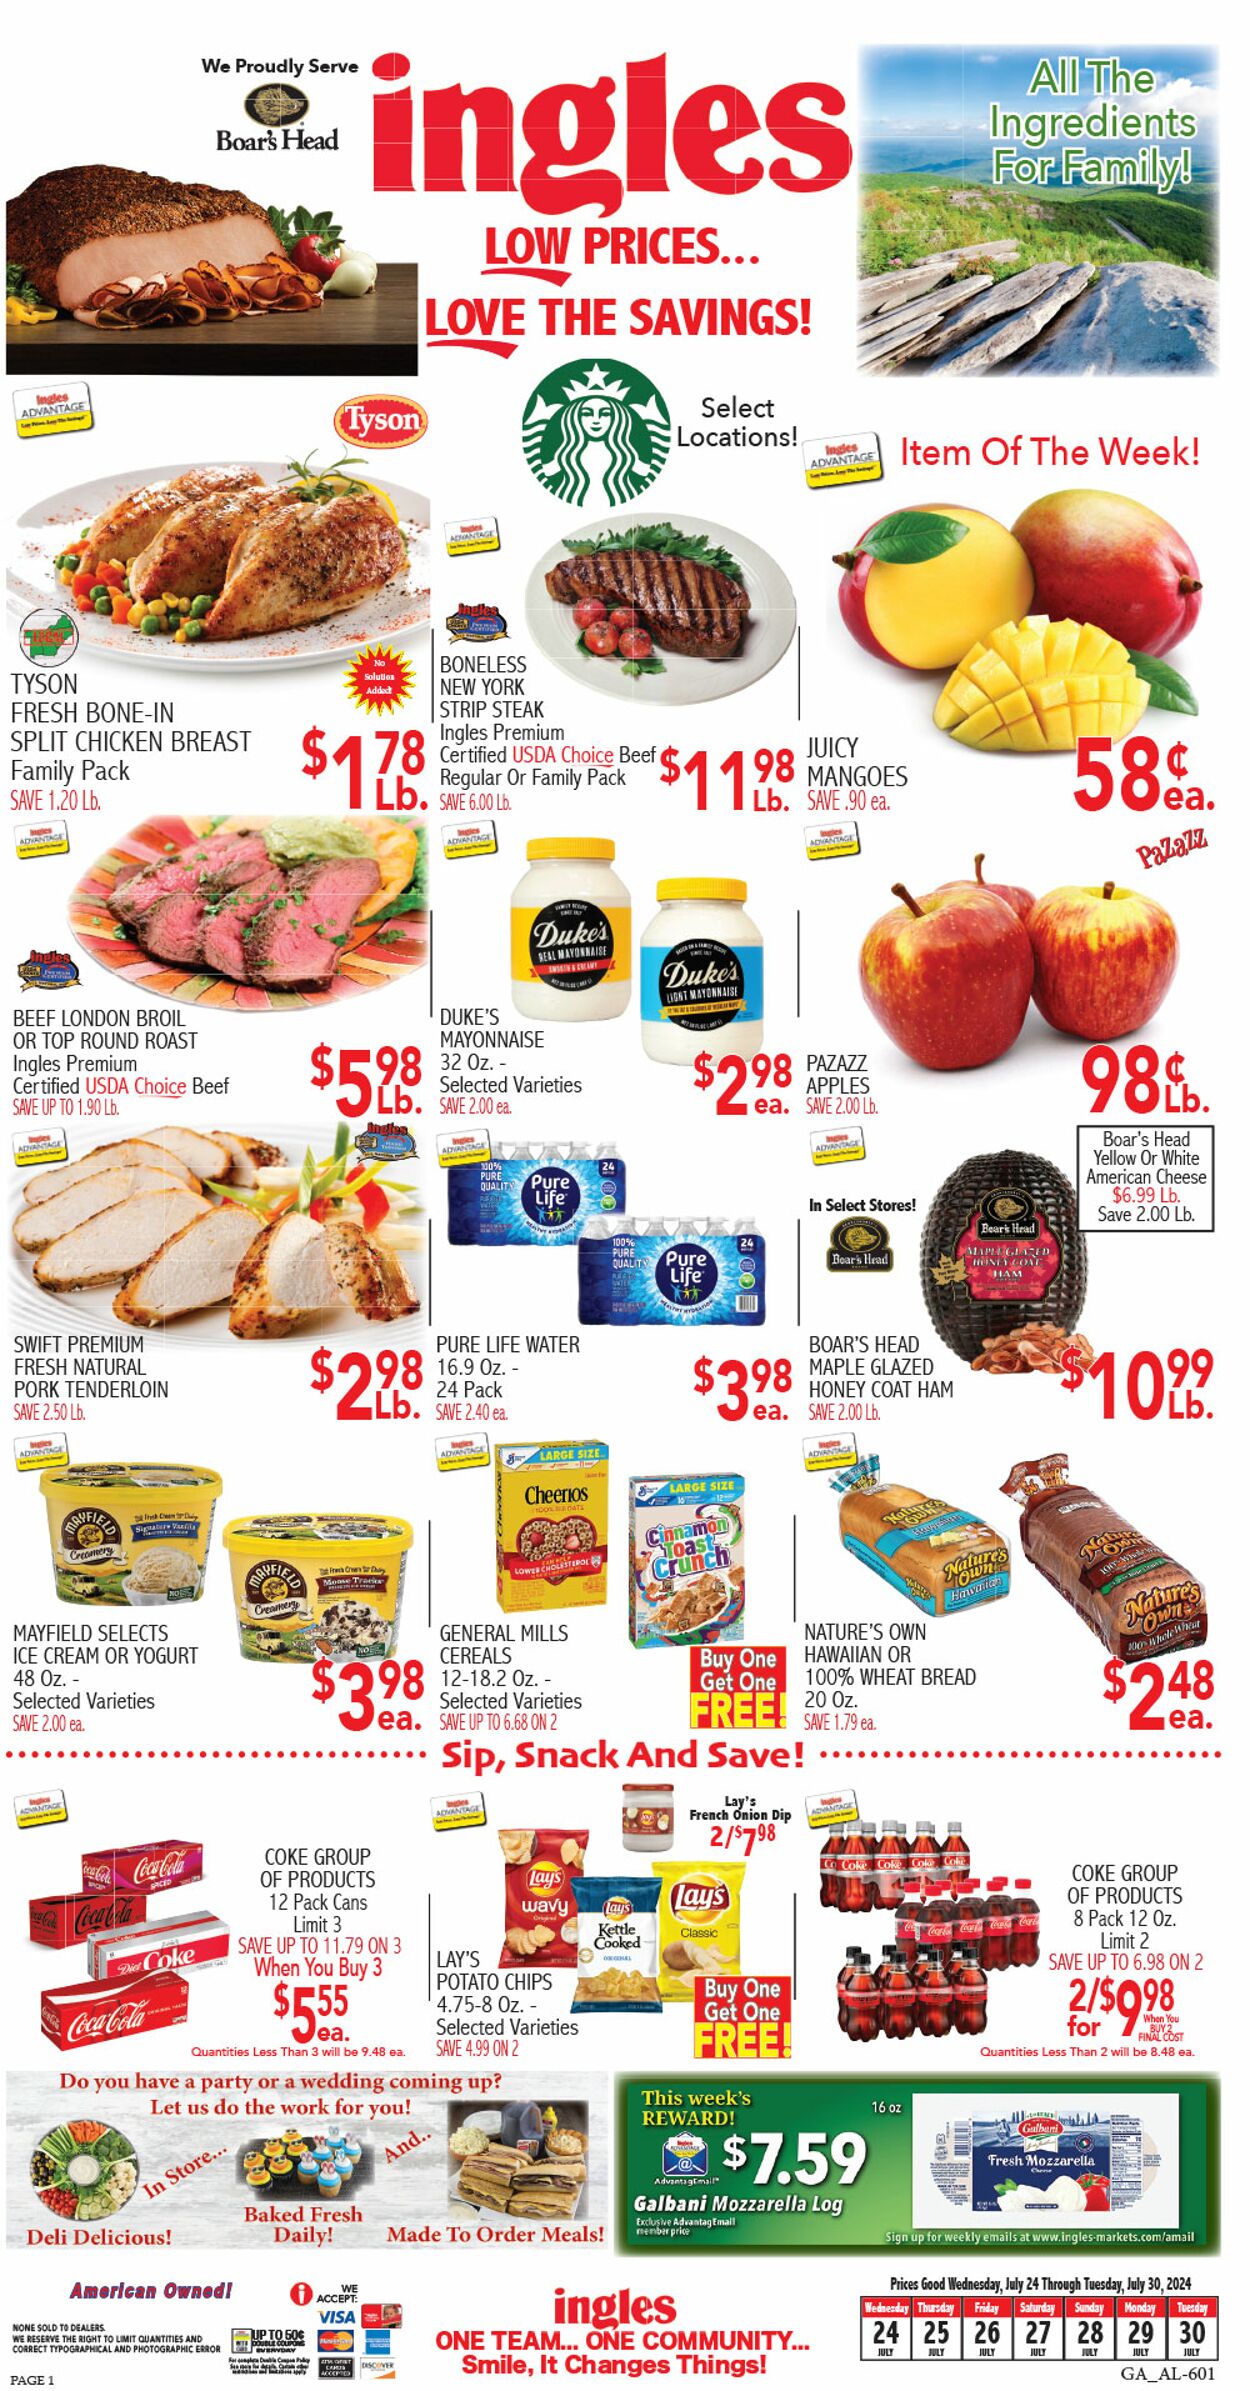 Ingles Promotional weekly ads